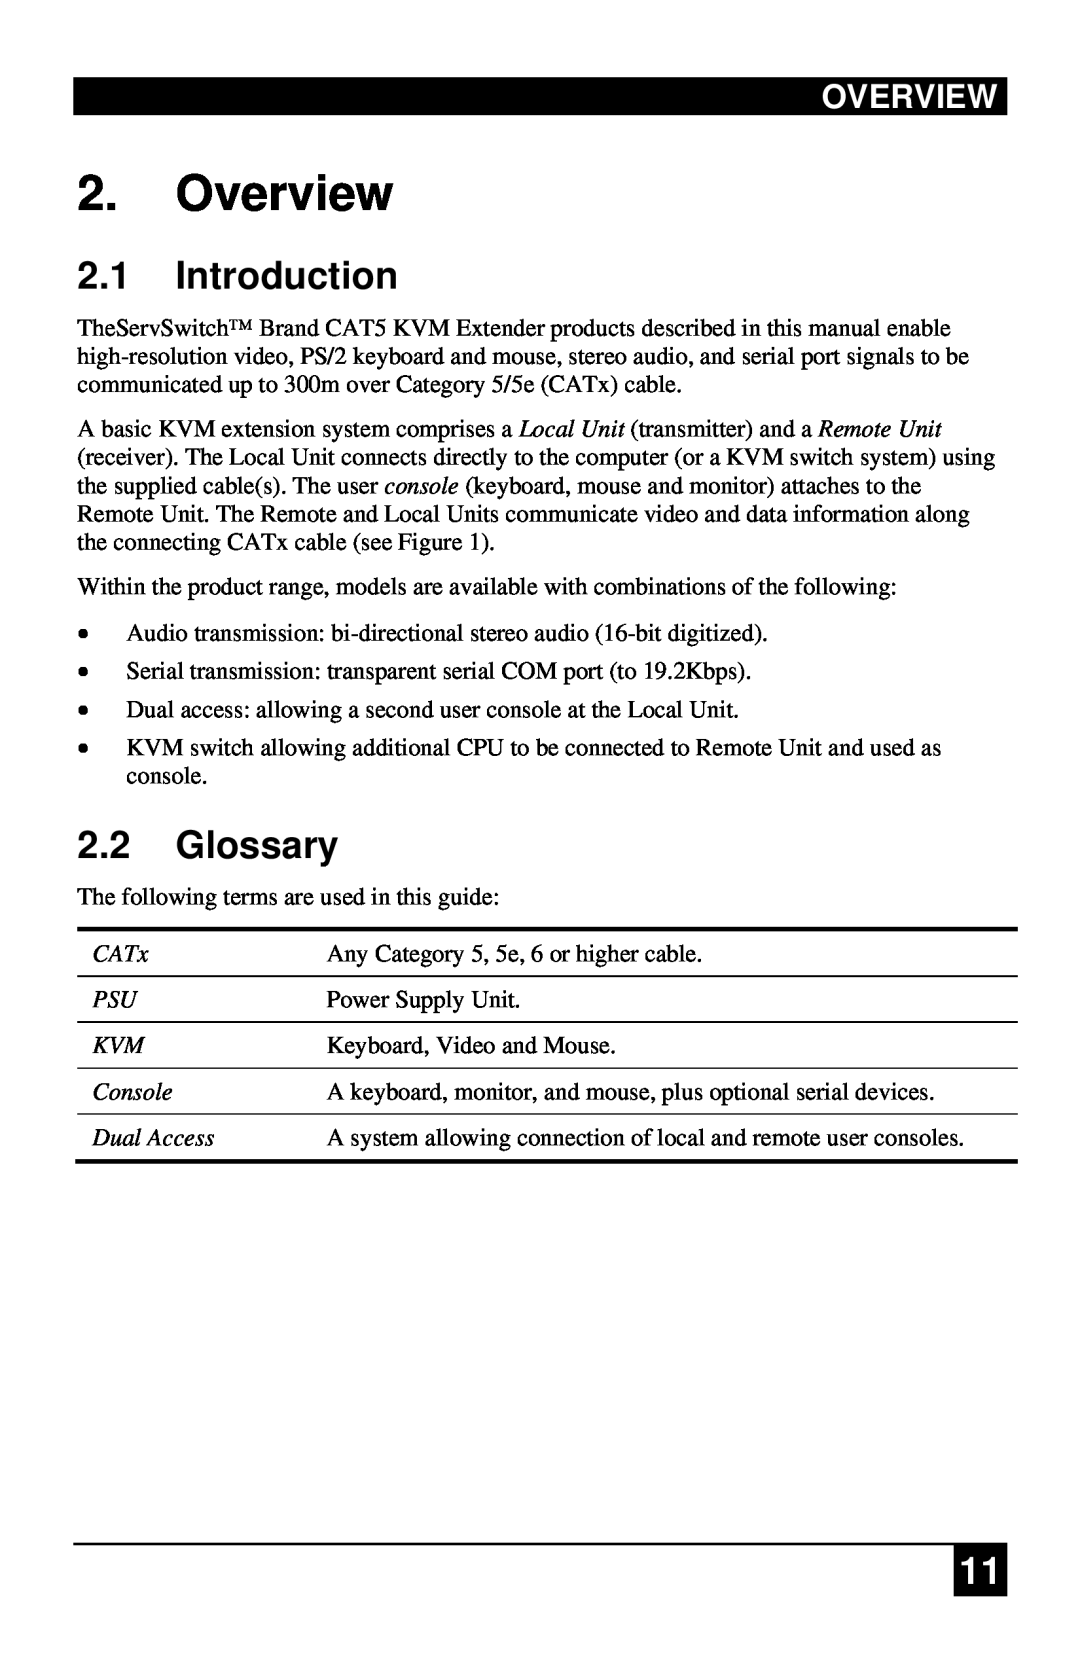 Black Box ACU1022A manual Overview, Introduction, Glossary, CATx, Any Category 5, 5e, 6 or higher cable, Power Supply Unit 